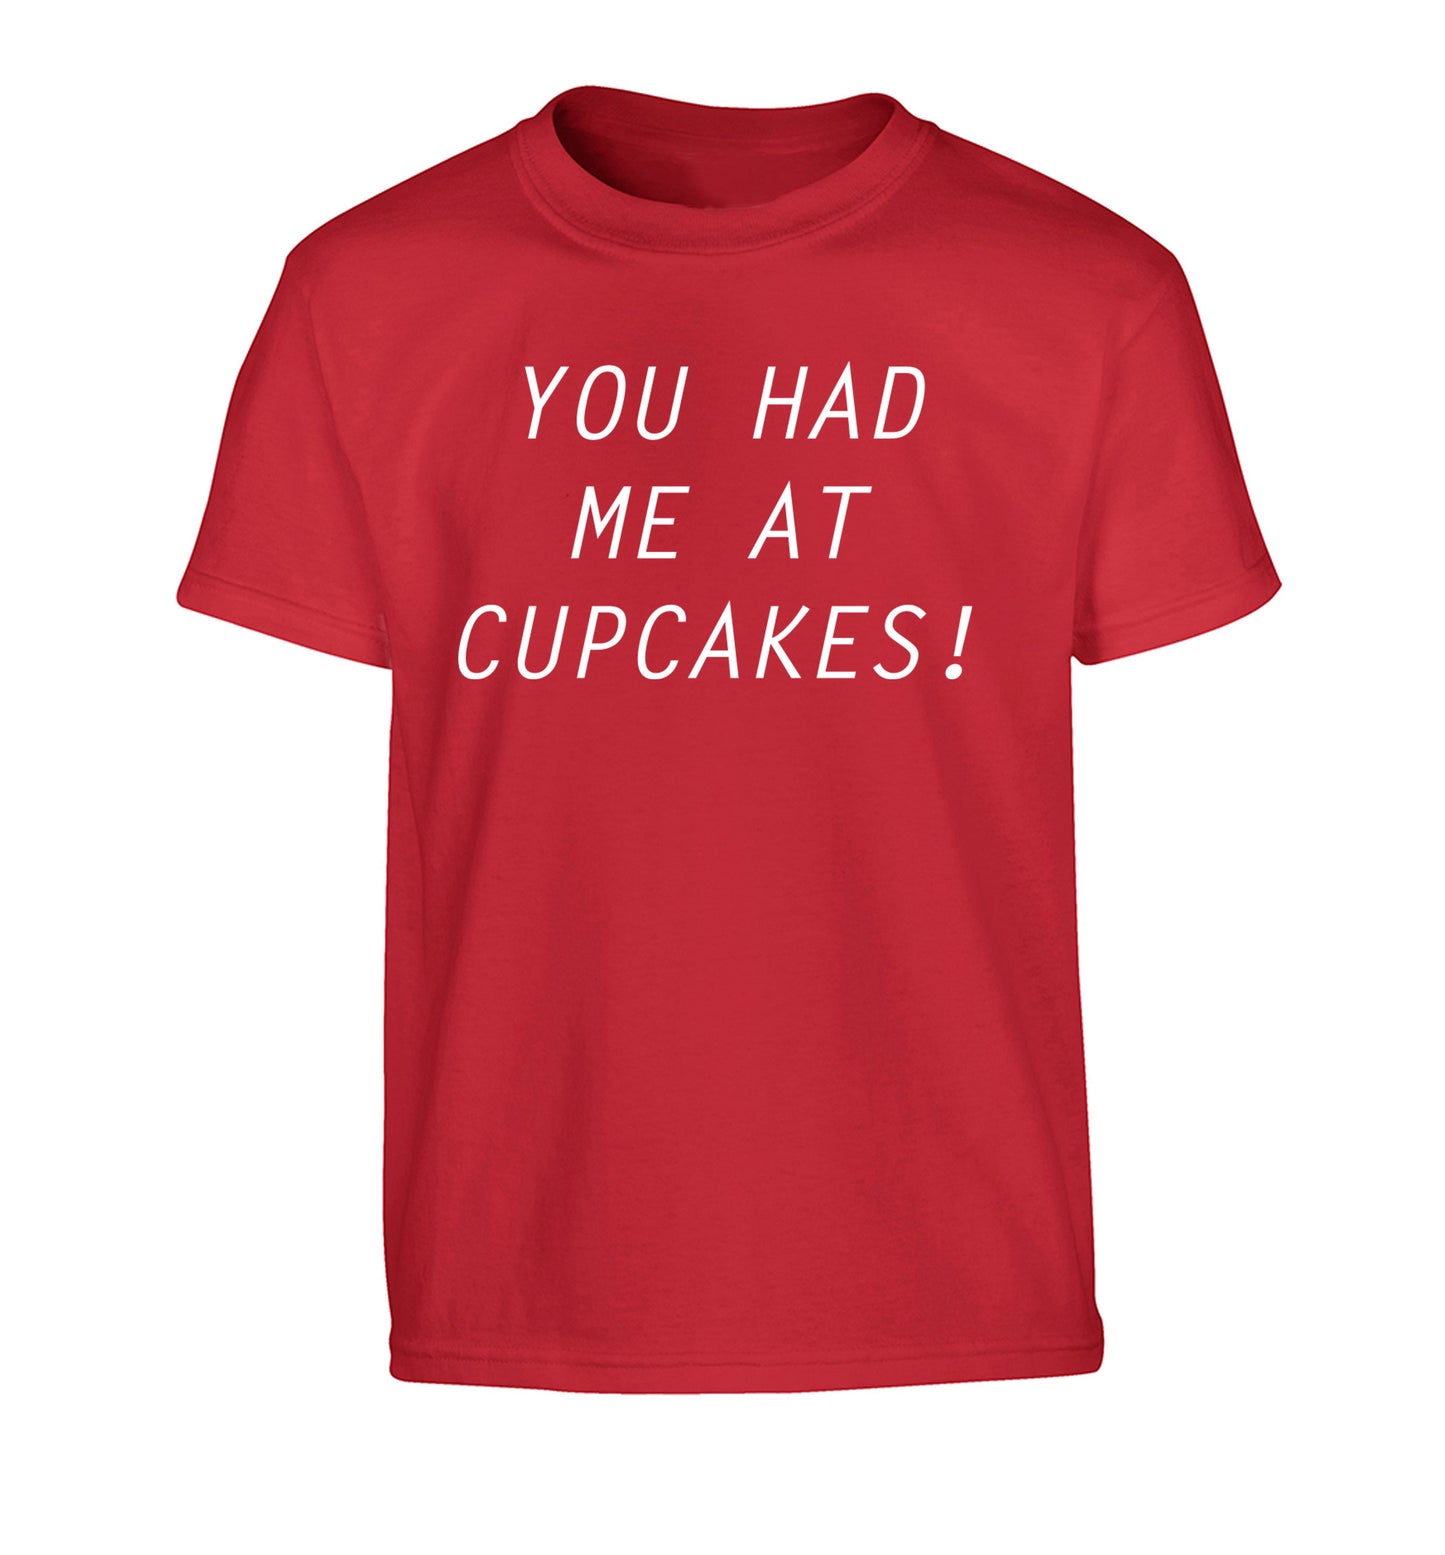 You had me at cupcakes Children's red Tshirt 12-14 Years